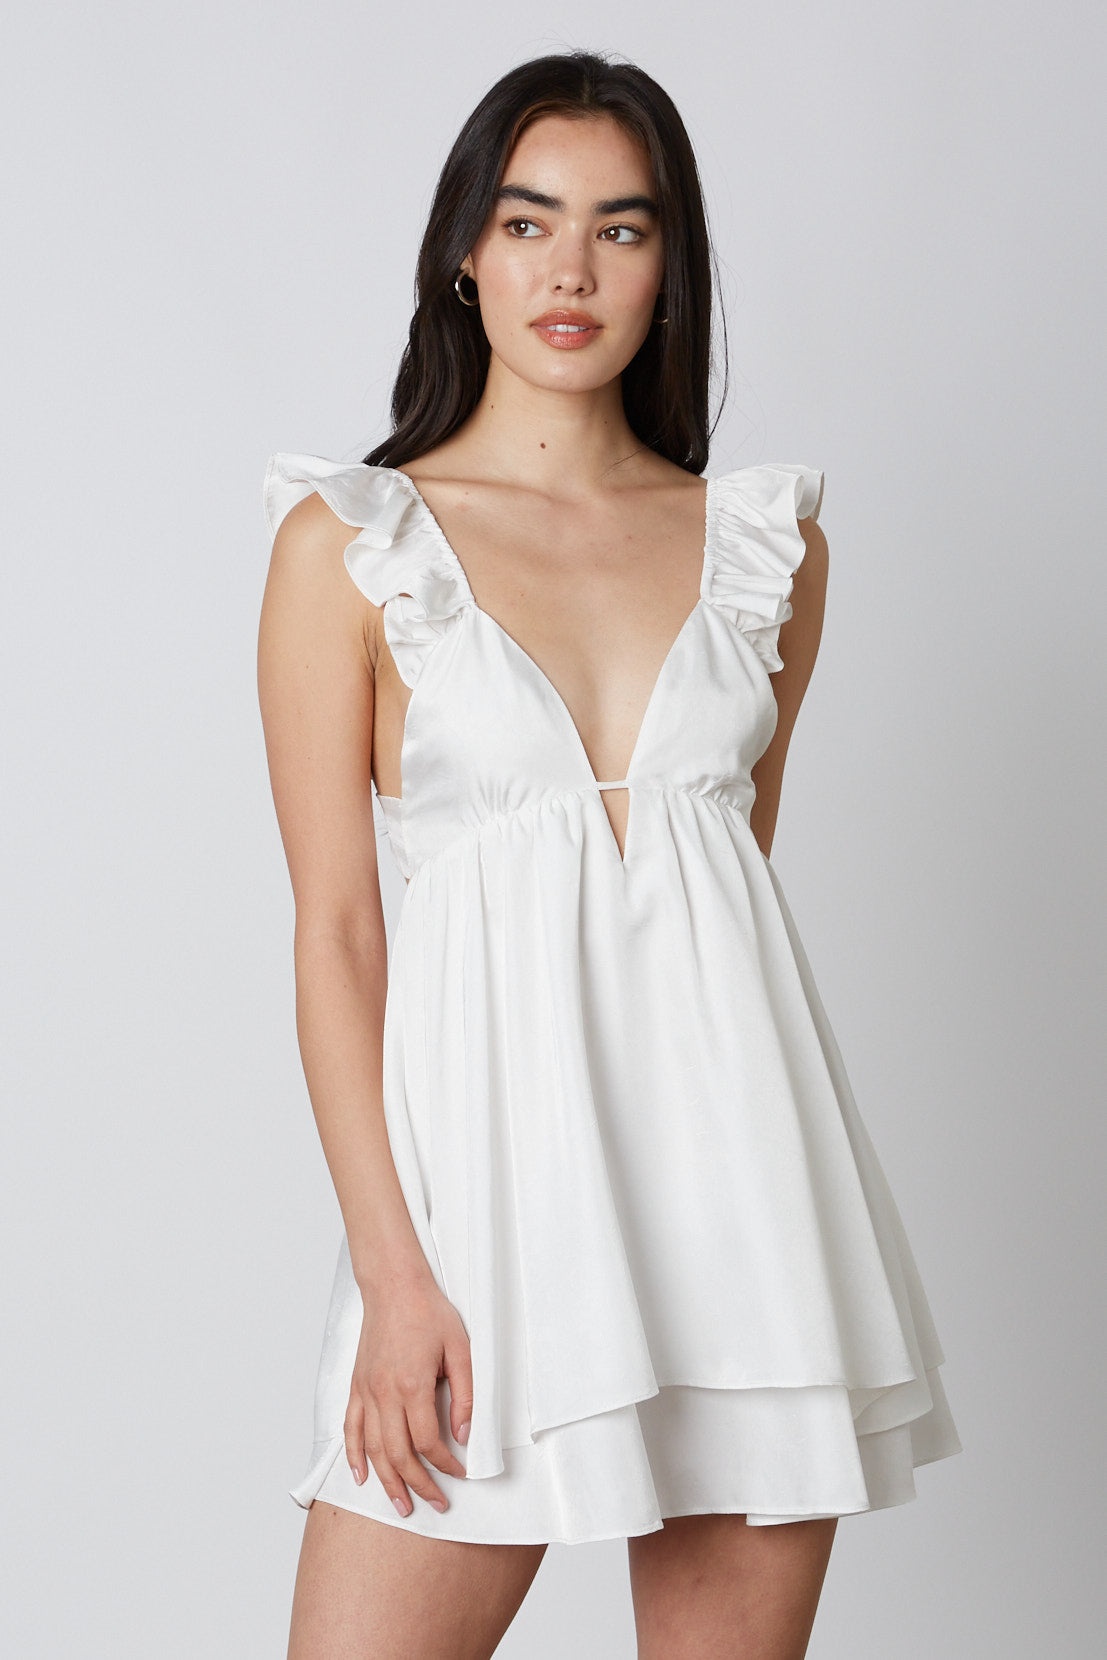 Babydoll Dress in White Front